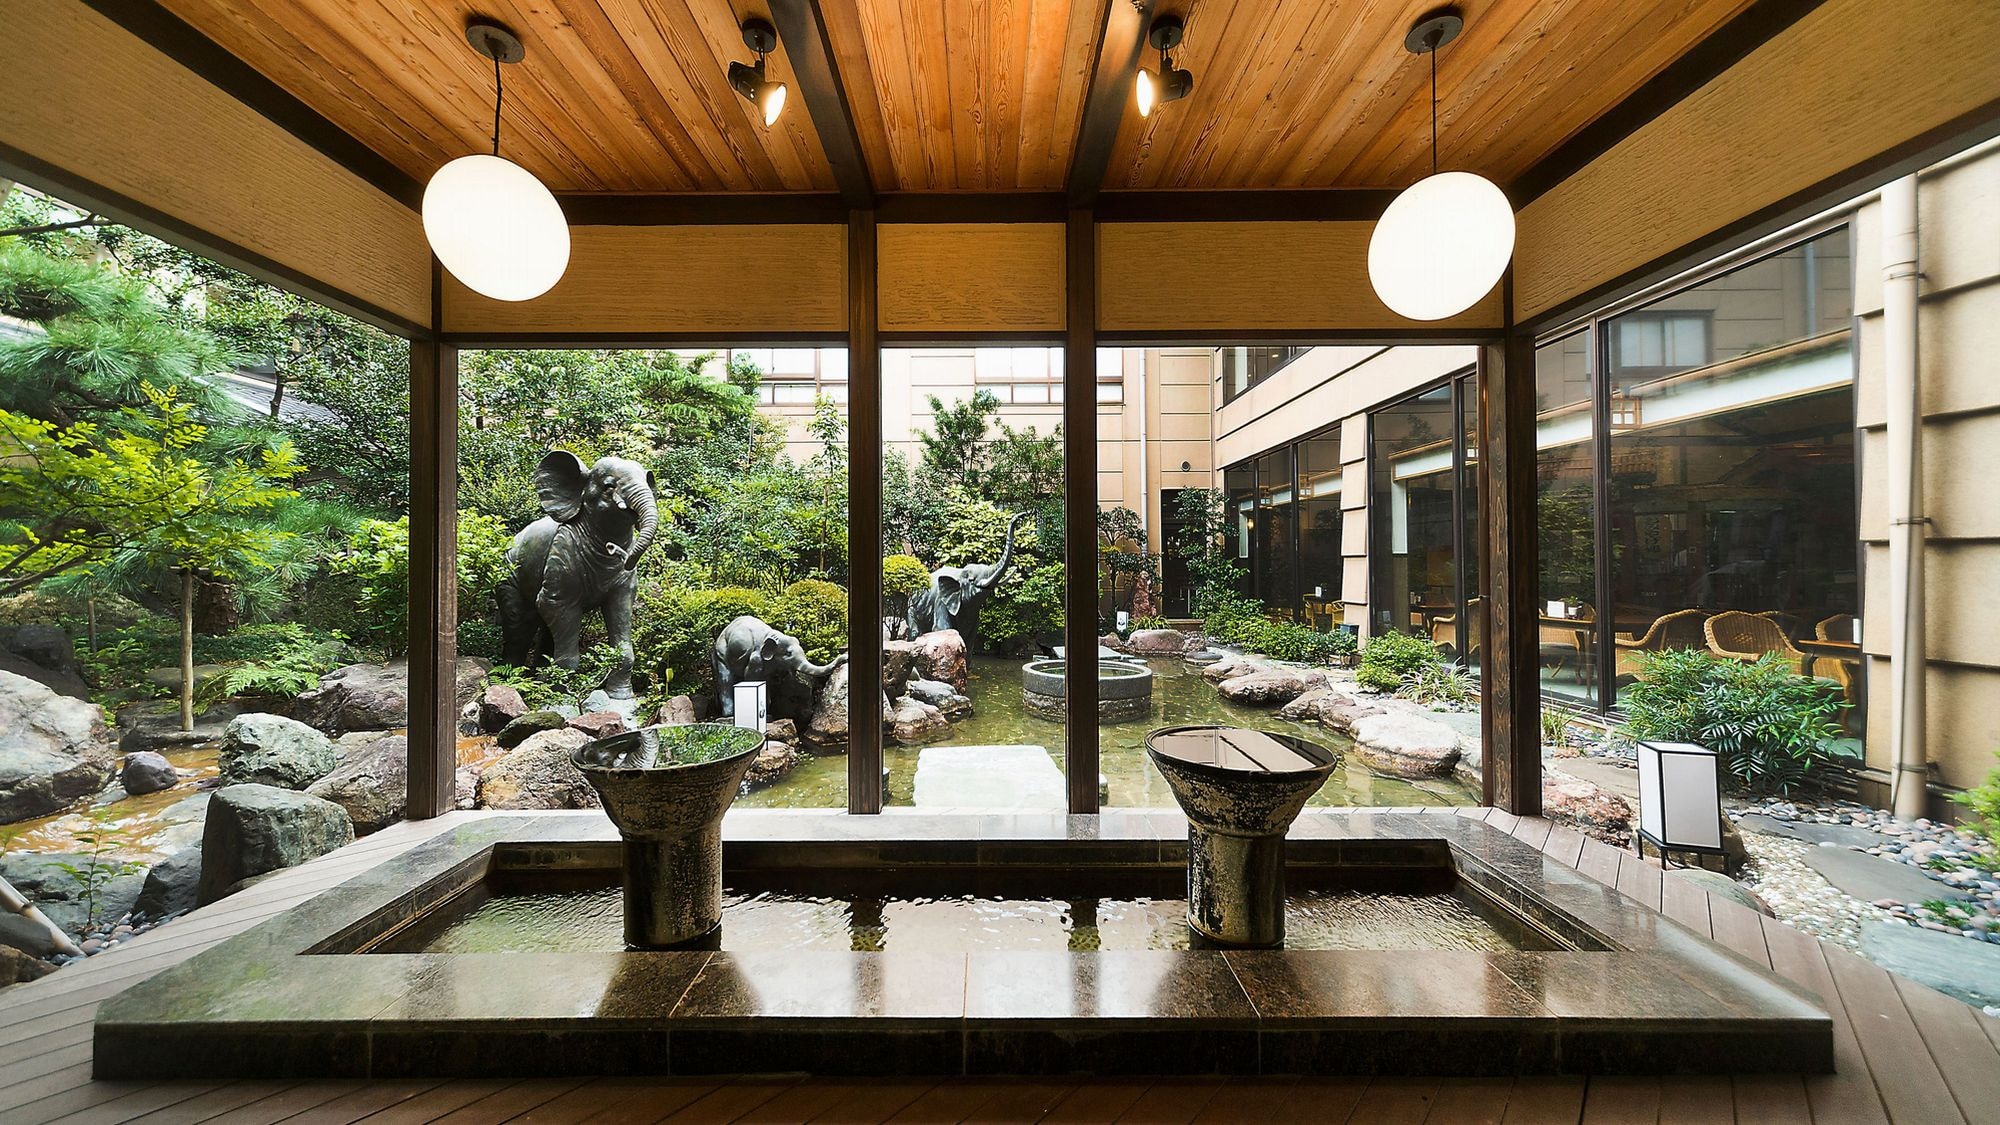 [Footbath] A popular handbath facing the courtyard, a footbath. If you are tired of traveling, click here first.